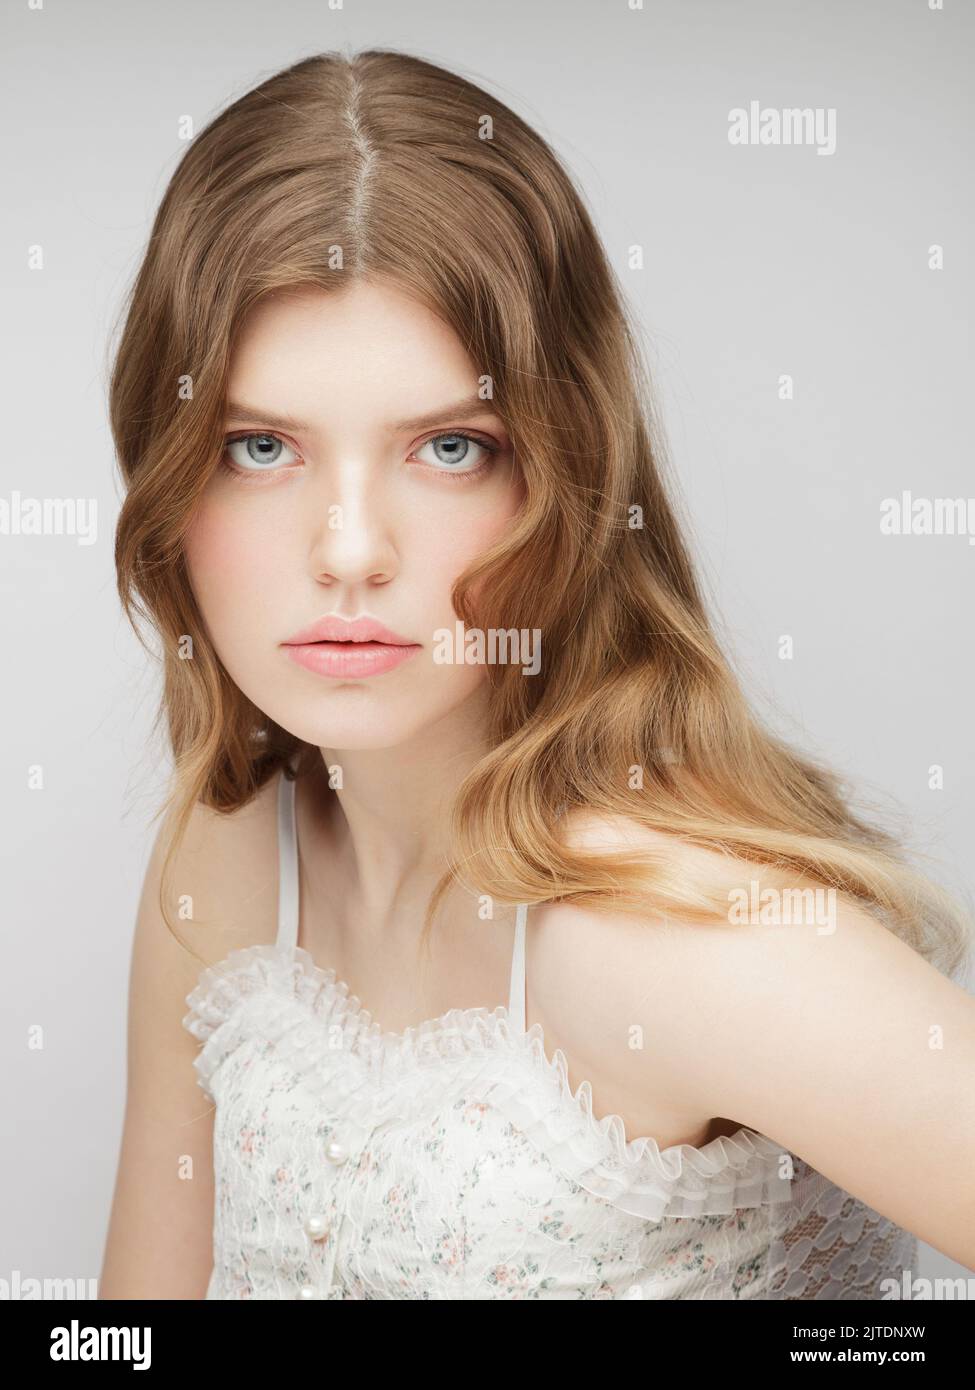 One young woman looking at camera. Vertical studio portrait of young charming girl. Stock Photo